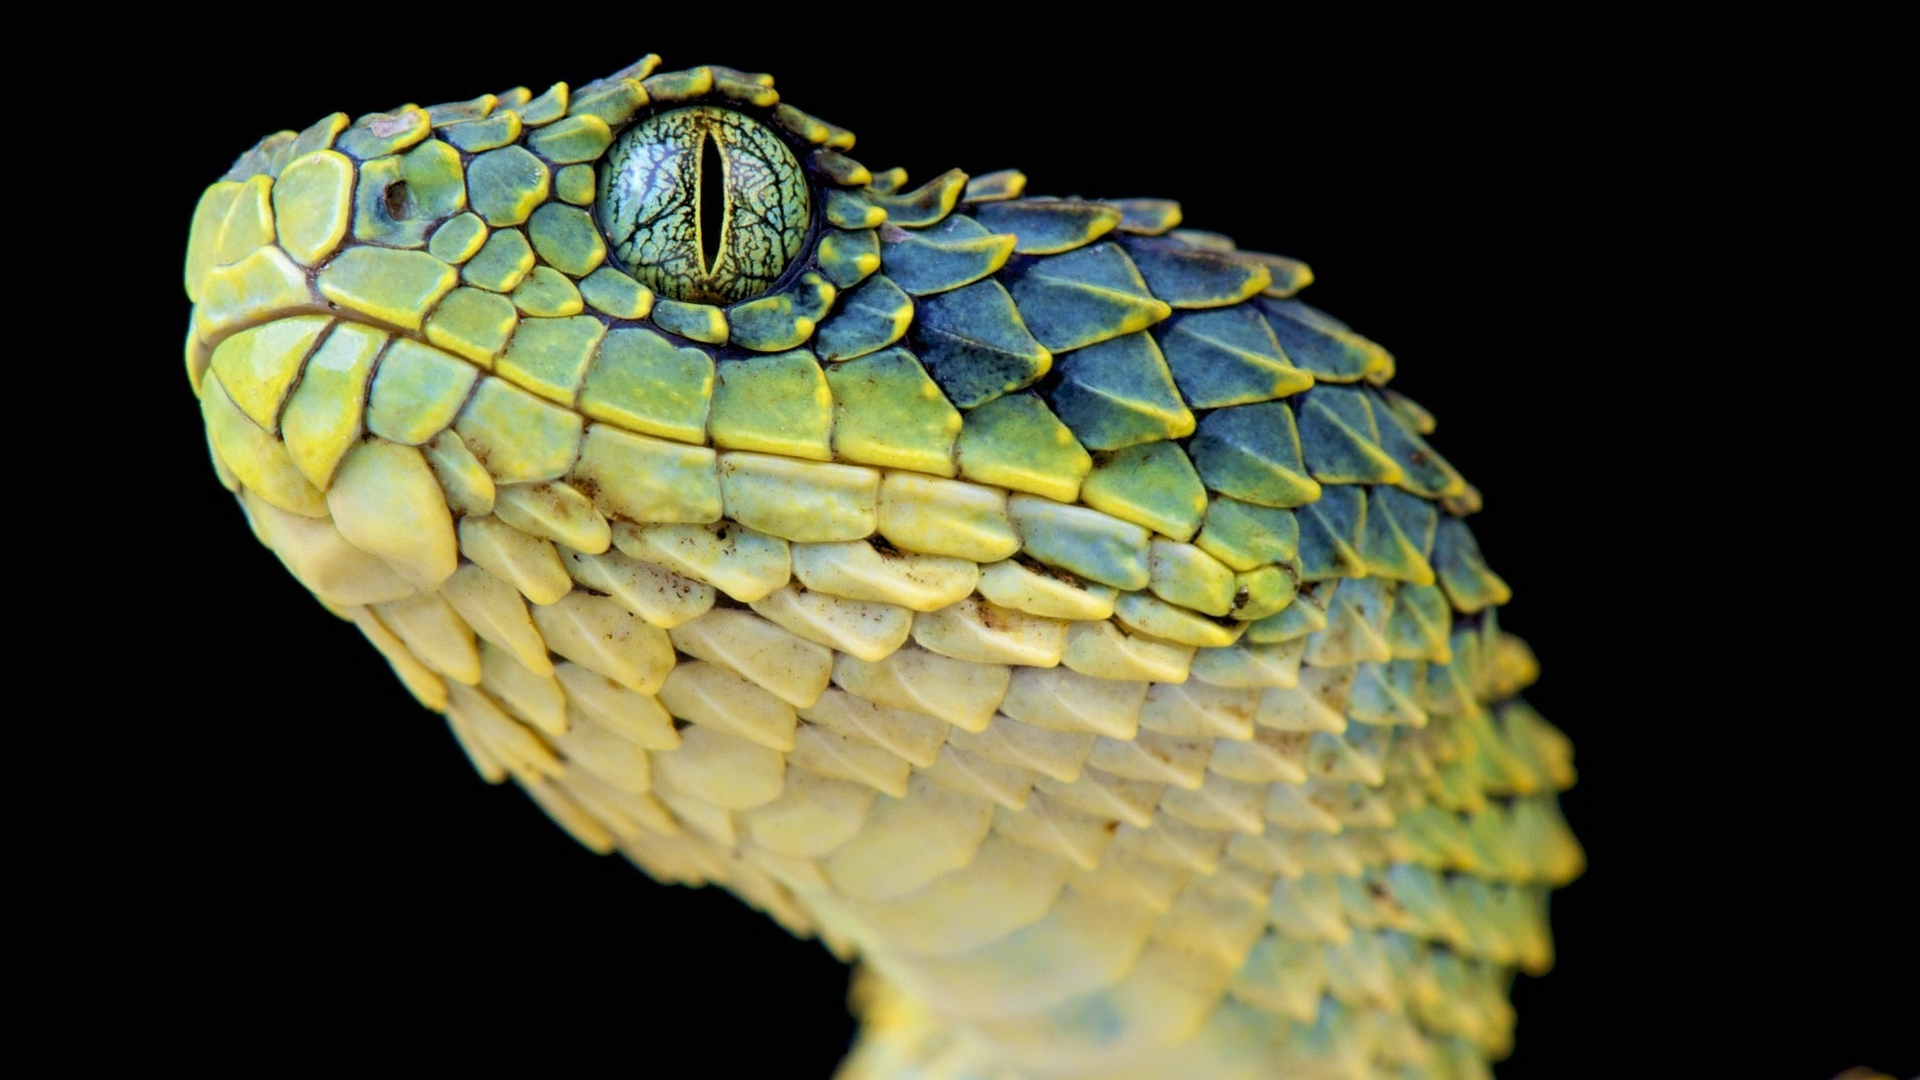 Rough Wood Viper for 1920 x 1080 HDTV 1080p resolution